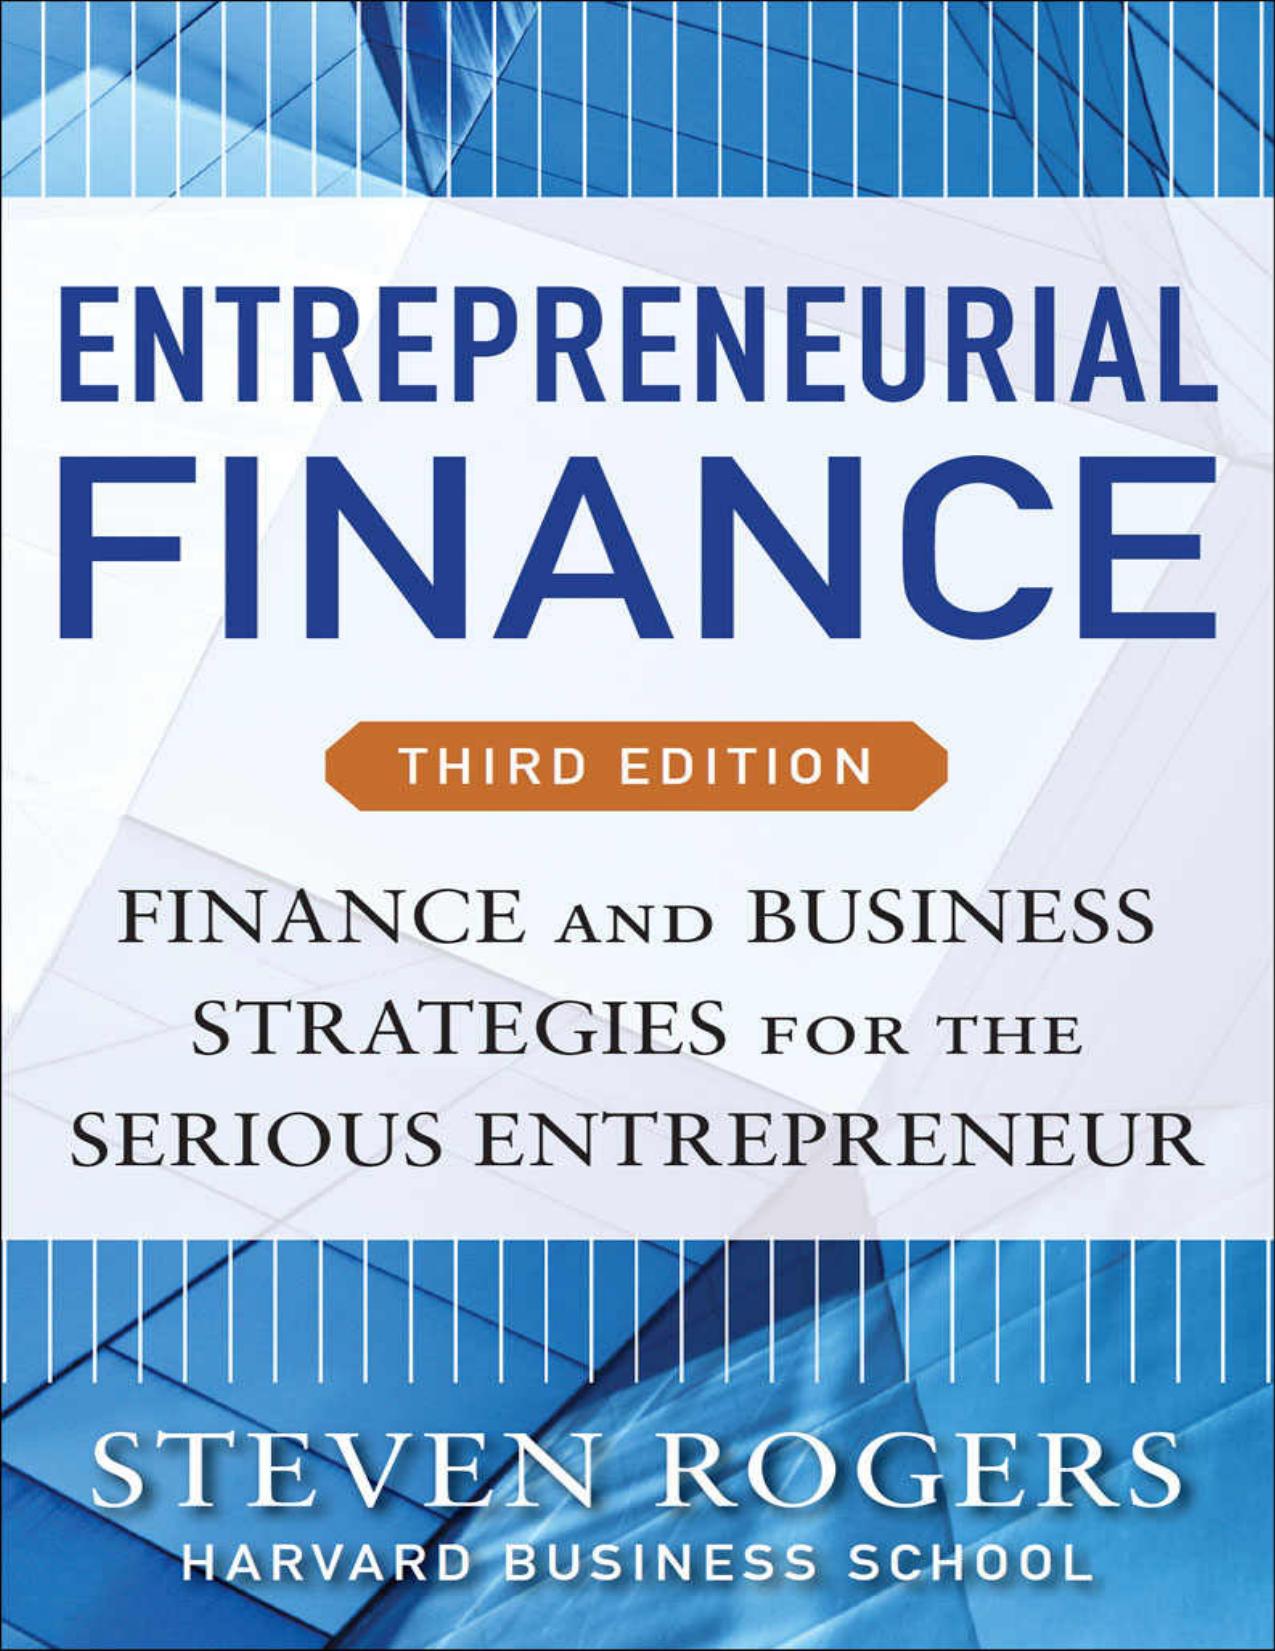 (eBook PDF)Entrepreneurial Finance Third Edition: Finance and Business Strategies for the Serious Entrepreneur by Steven Rogers,Roza E. Makonnen